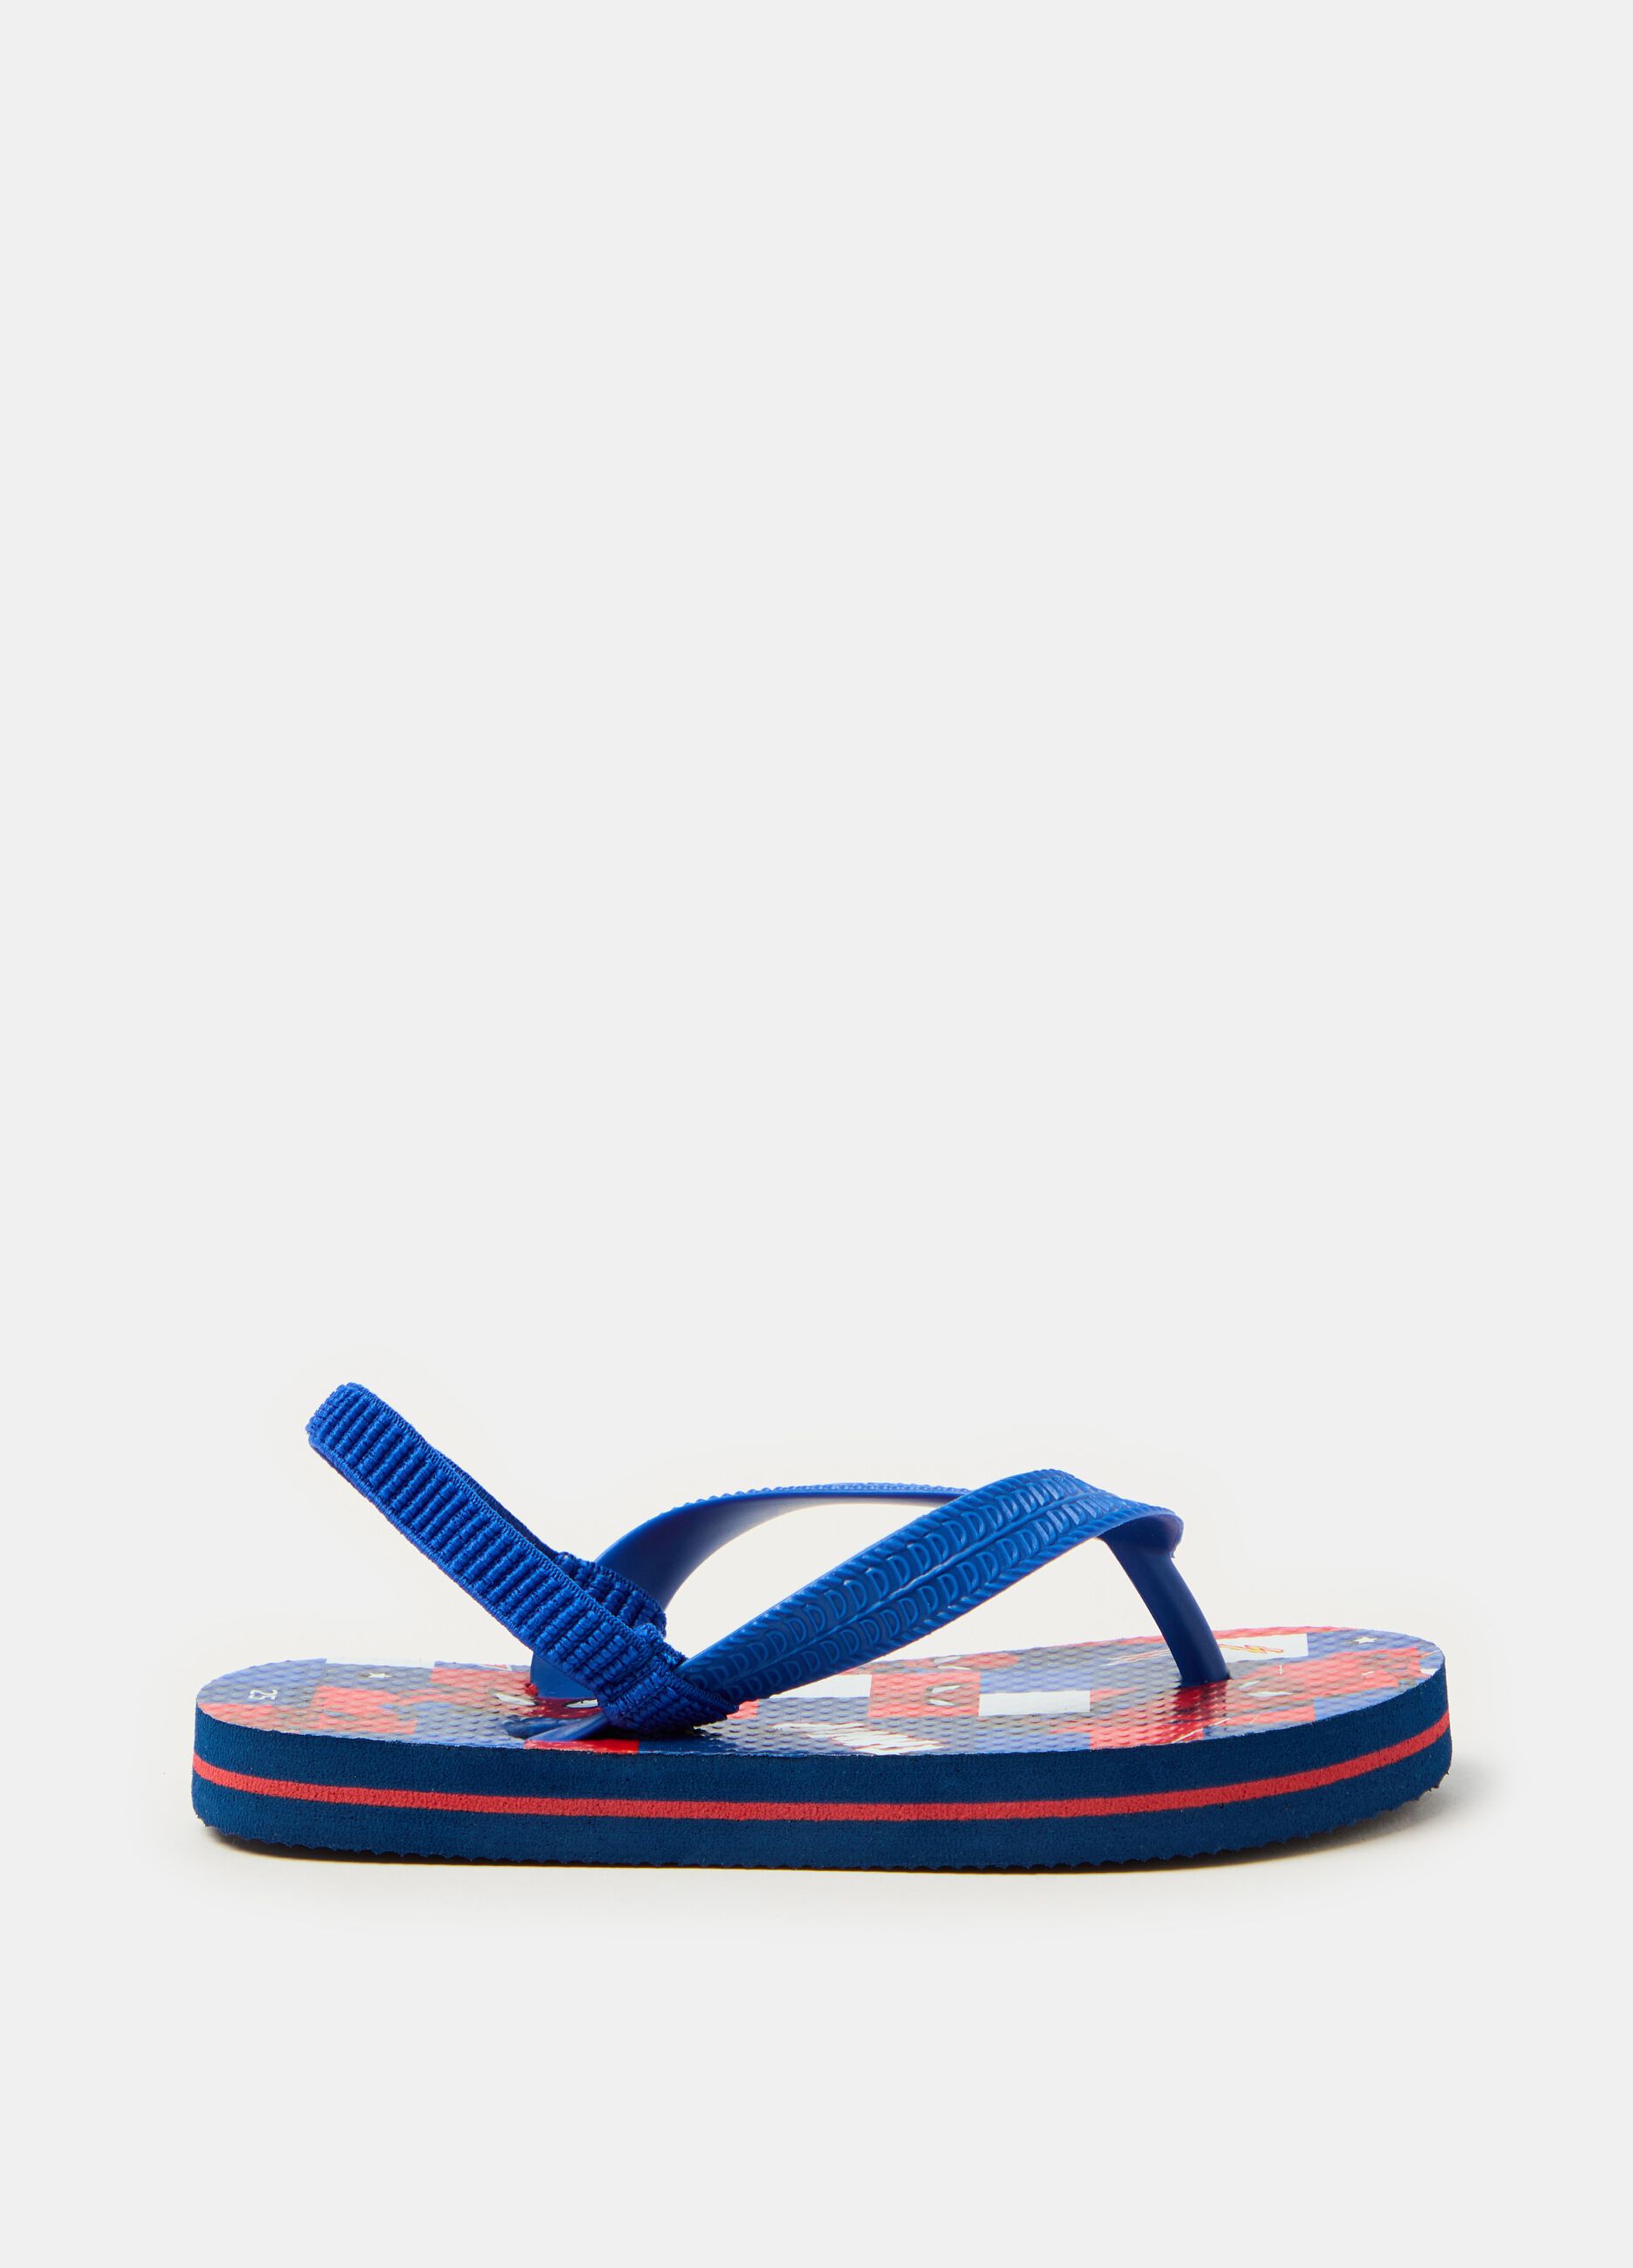 Sandals with Spiderman print